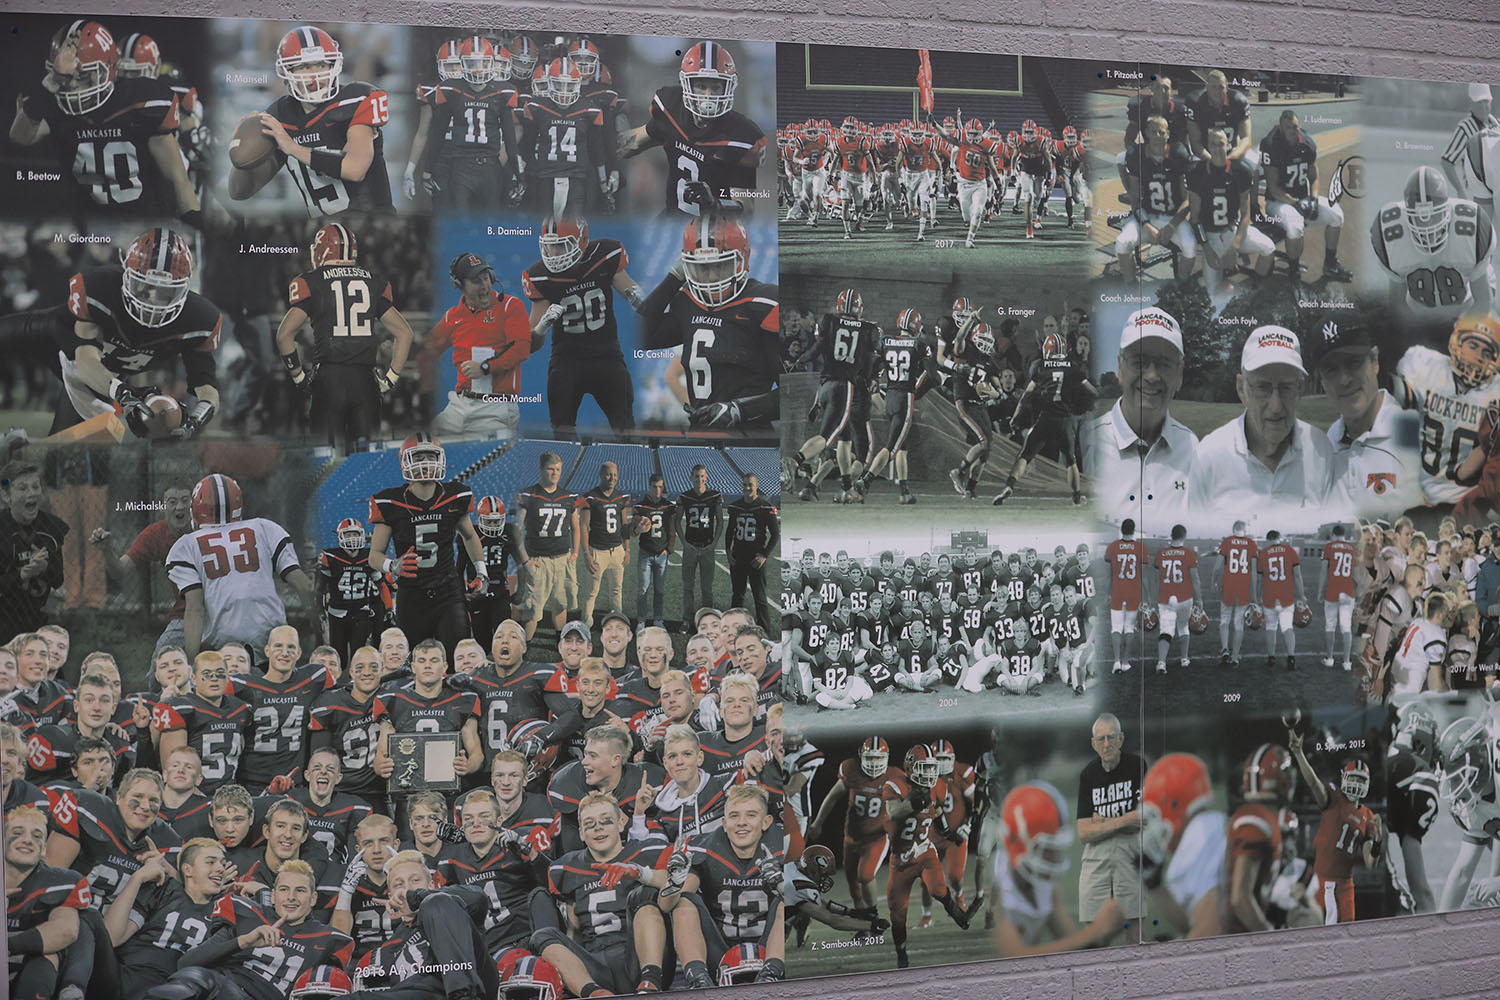 Lancaster Football from the 2010's